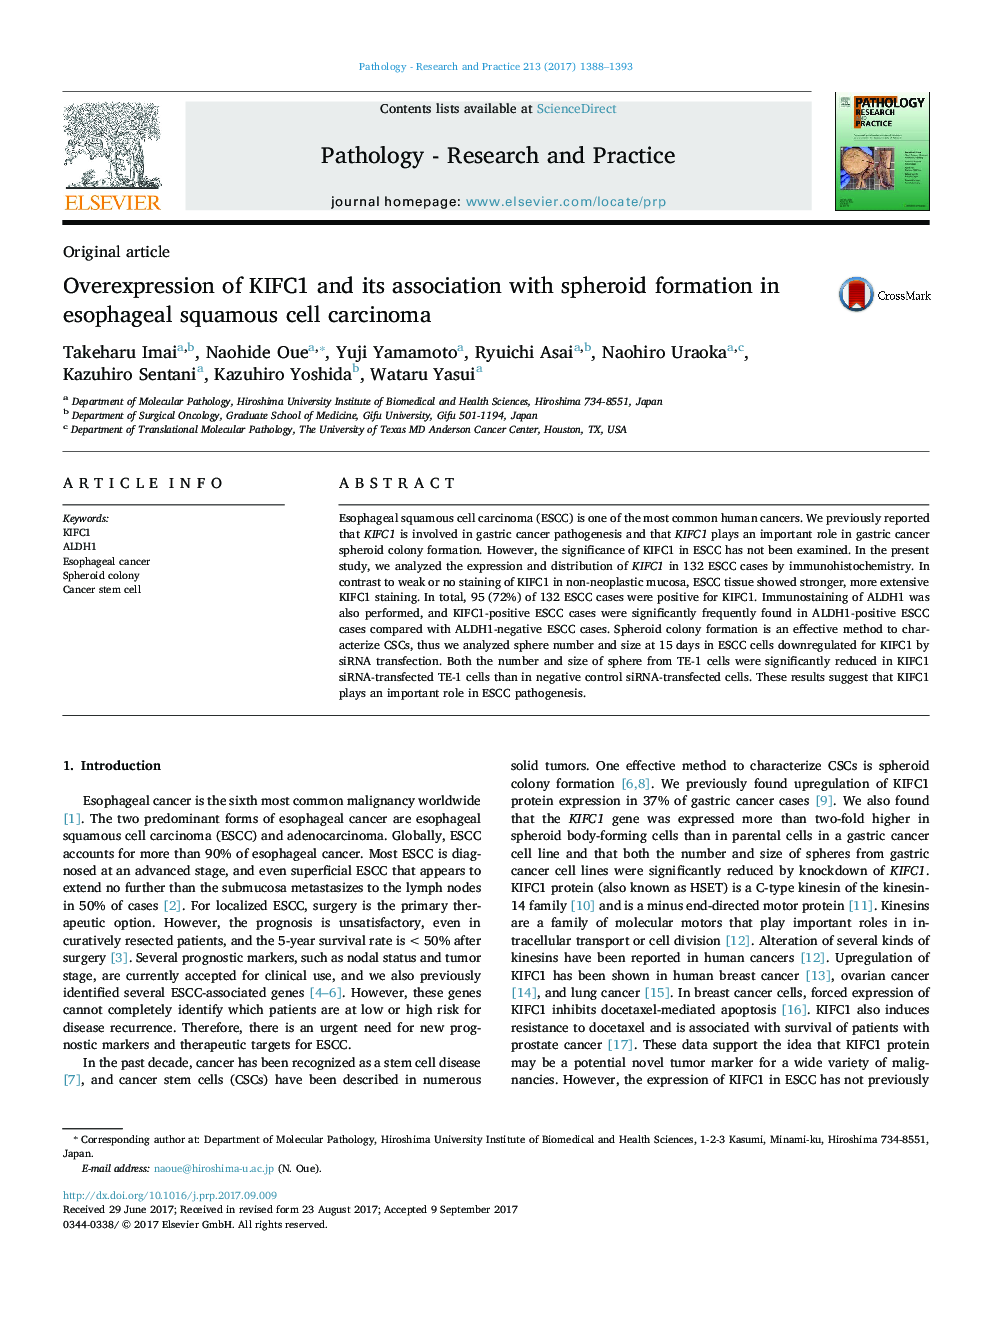 Original articleOverexpression of KIFC1 and its association with spheroid formation in esophageal squamous cell carcinoma